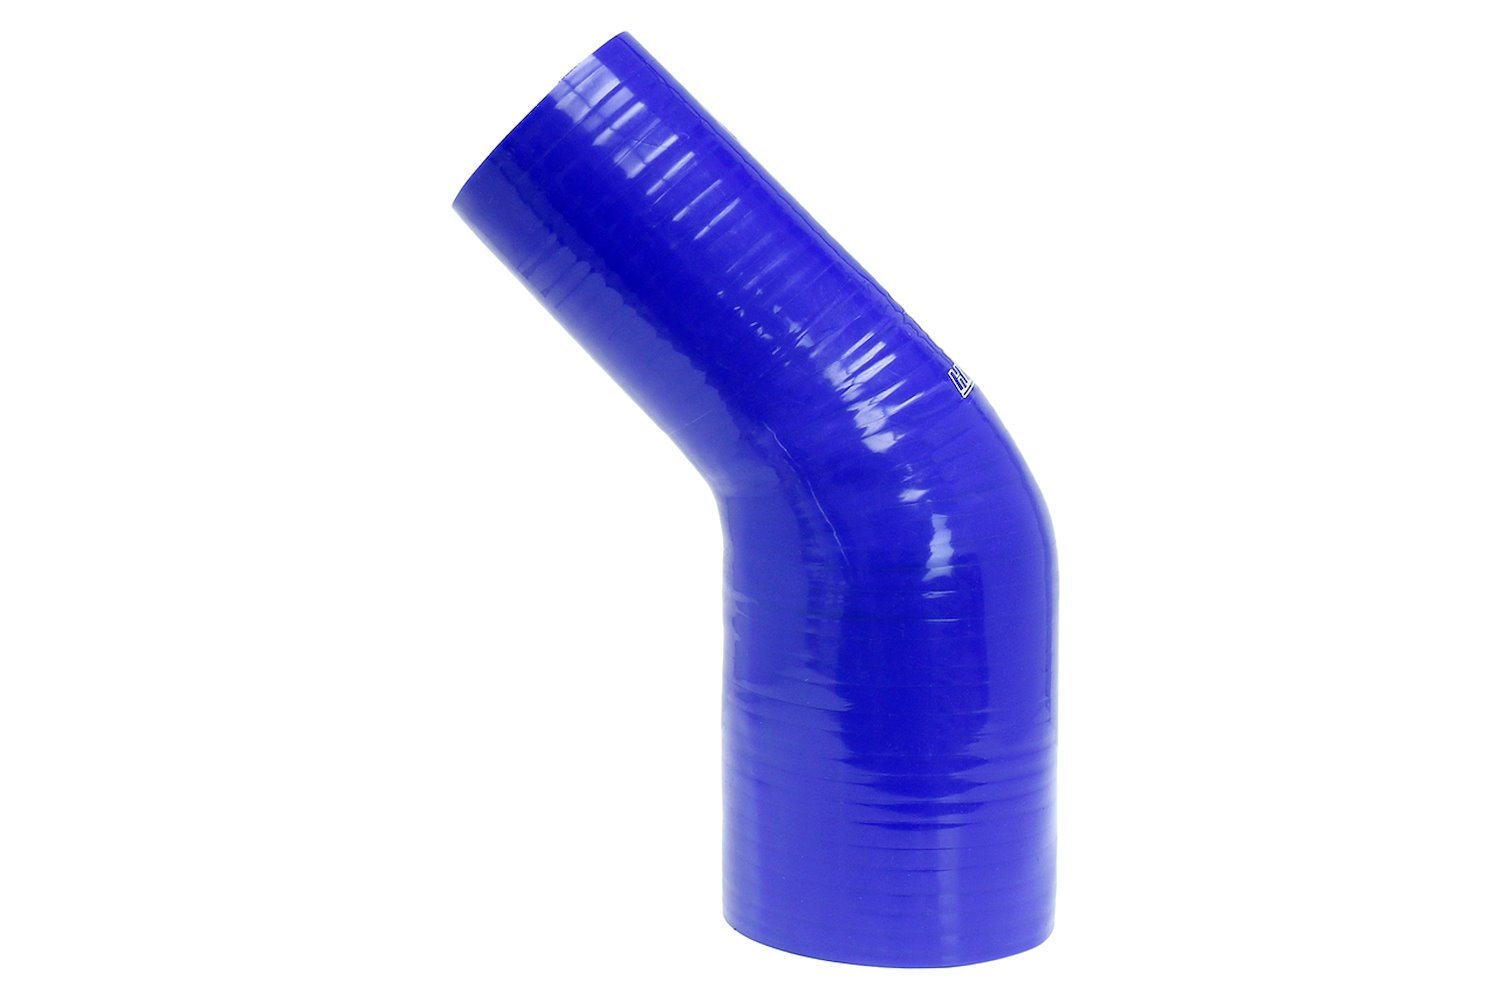 HTSER45-350-400-BLUE Silicone 45-Degree Elbow Hose, High-Temp 4-Ply Reinforced, 3-1/2 in. - 4 in. ID, Blue